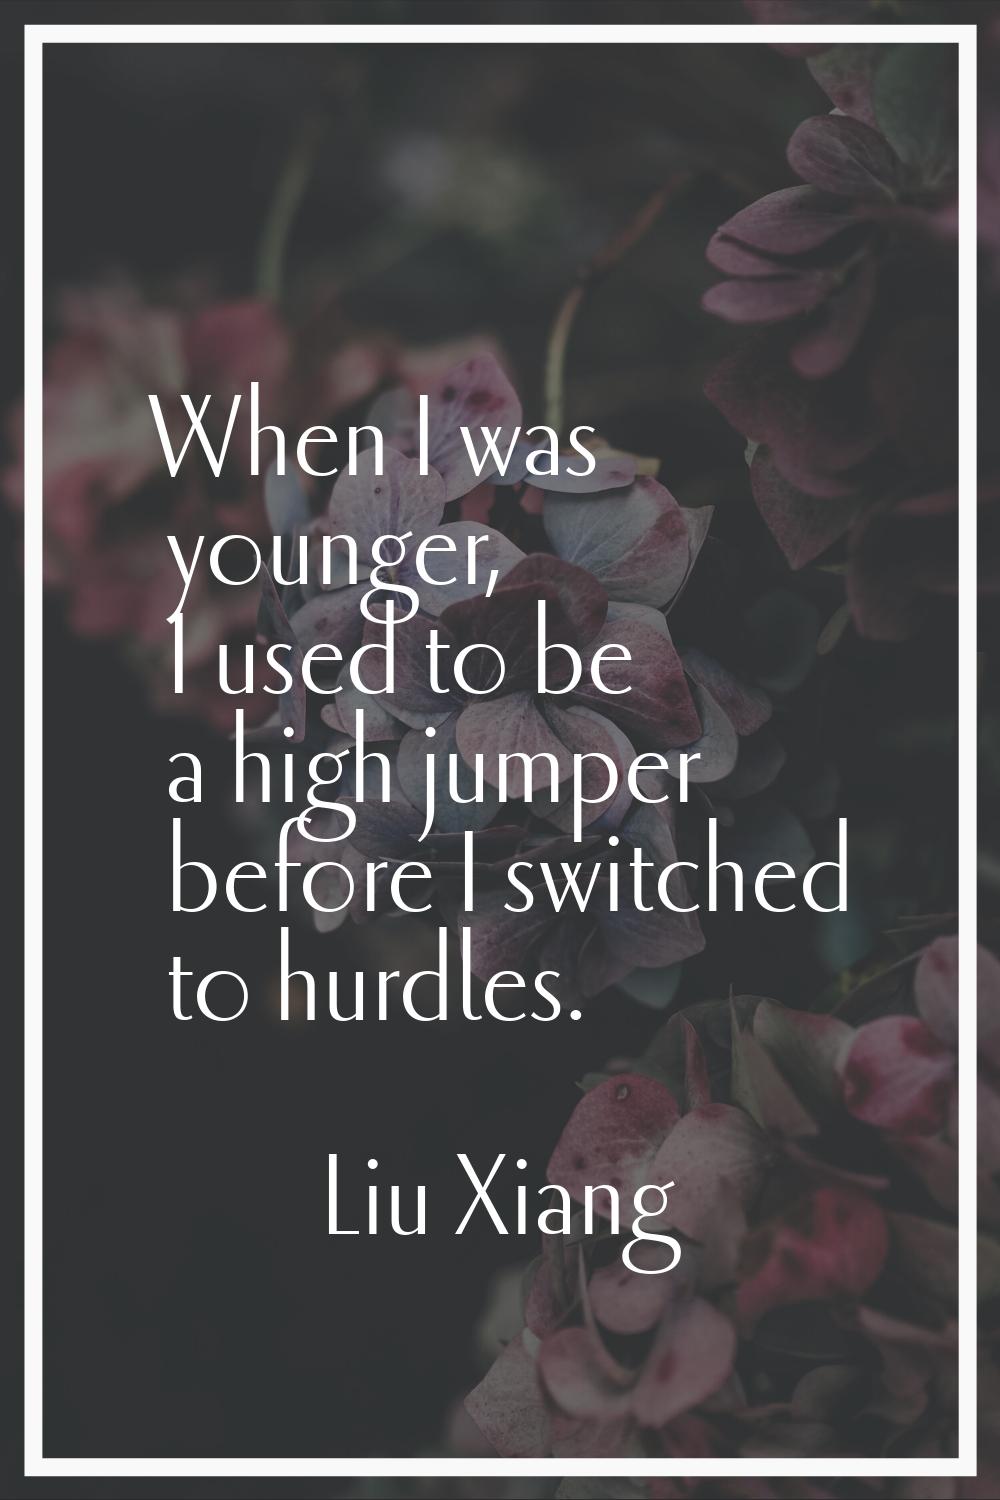 When I was younger, I used to be a high jumper before I switched to hurdles.